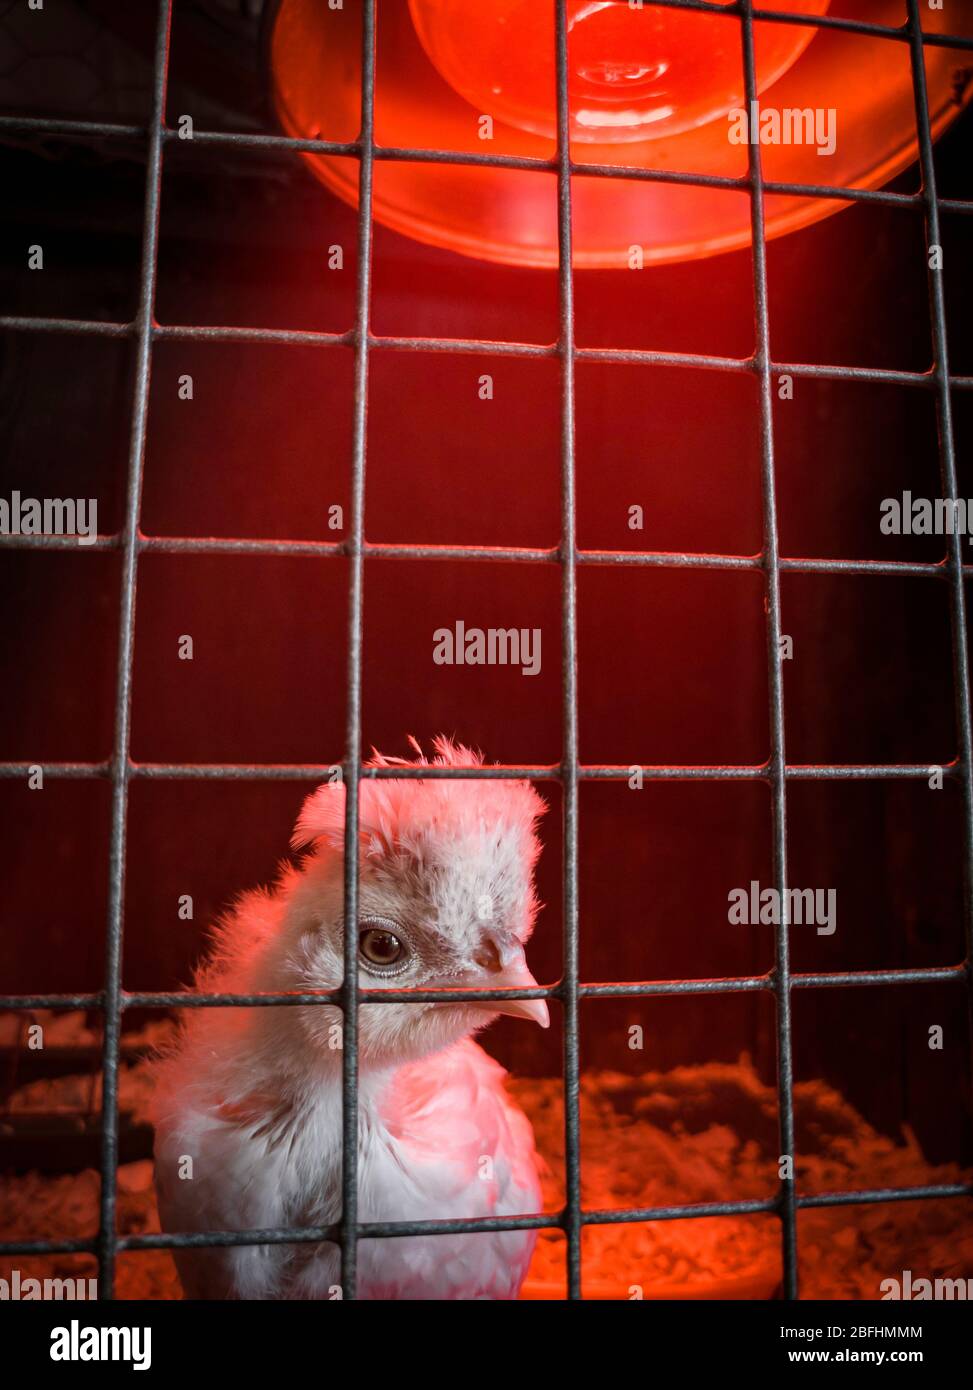 Self Isolation / Quarantine Concept Image. New Born Chick under a heat lamp peering through the bars of its cage. Sussex, England, UK Stock Photo